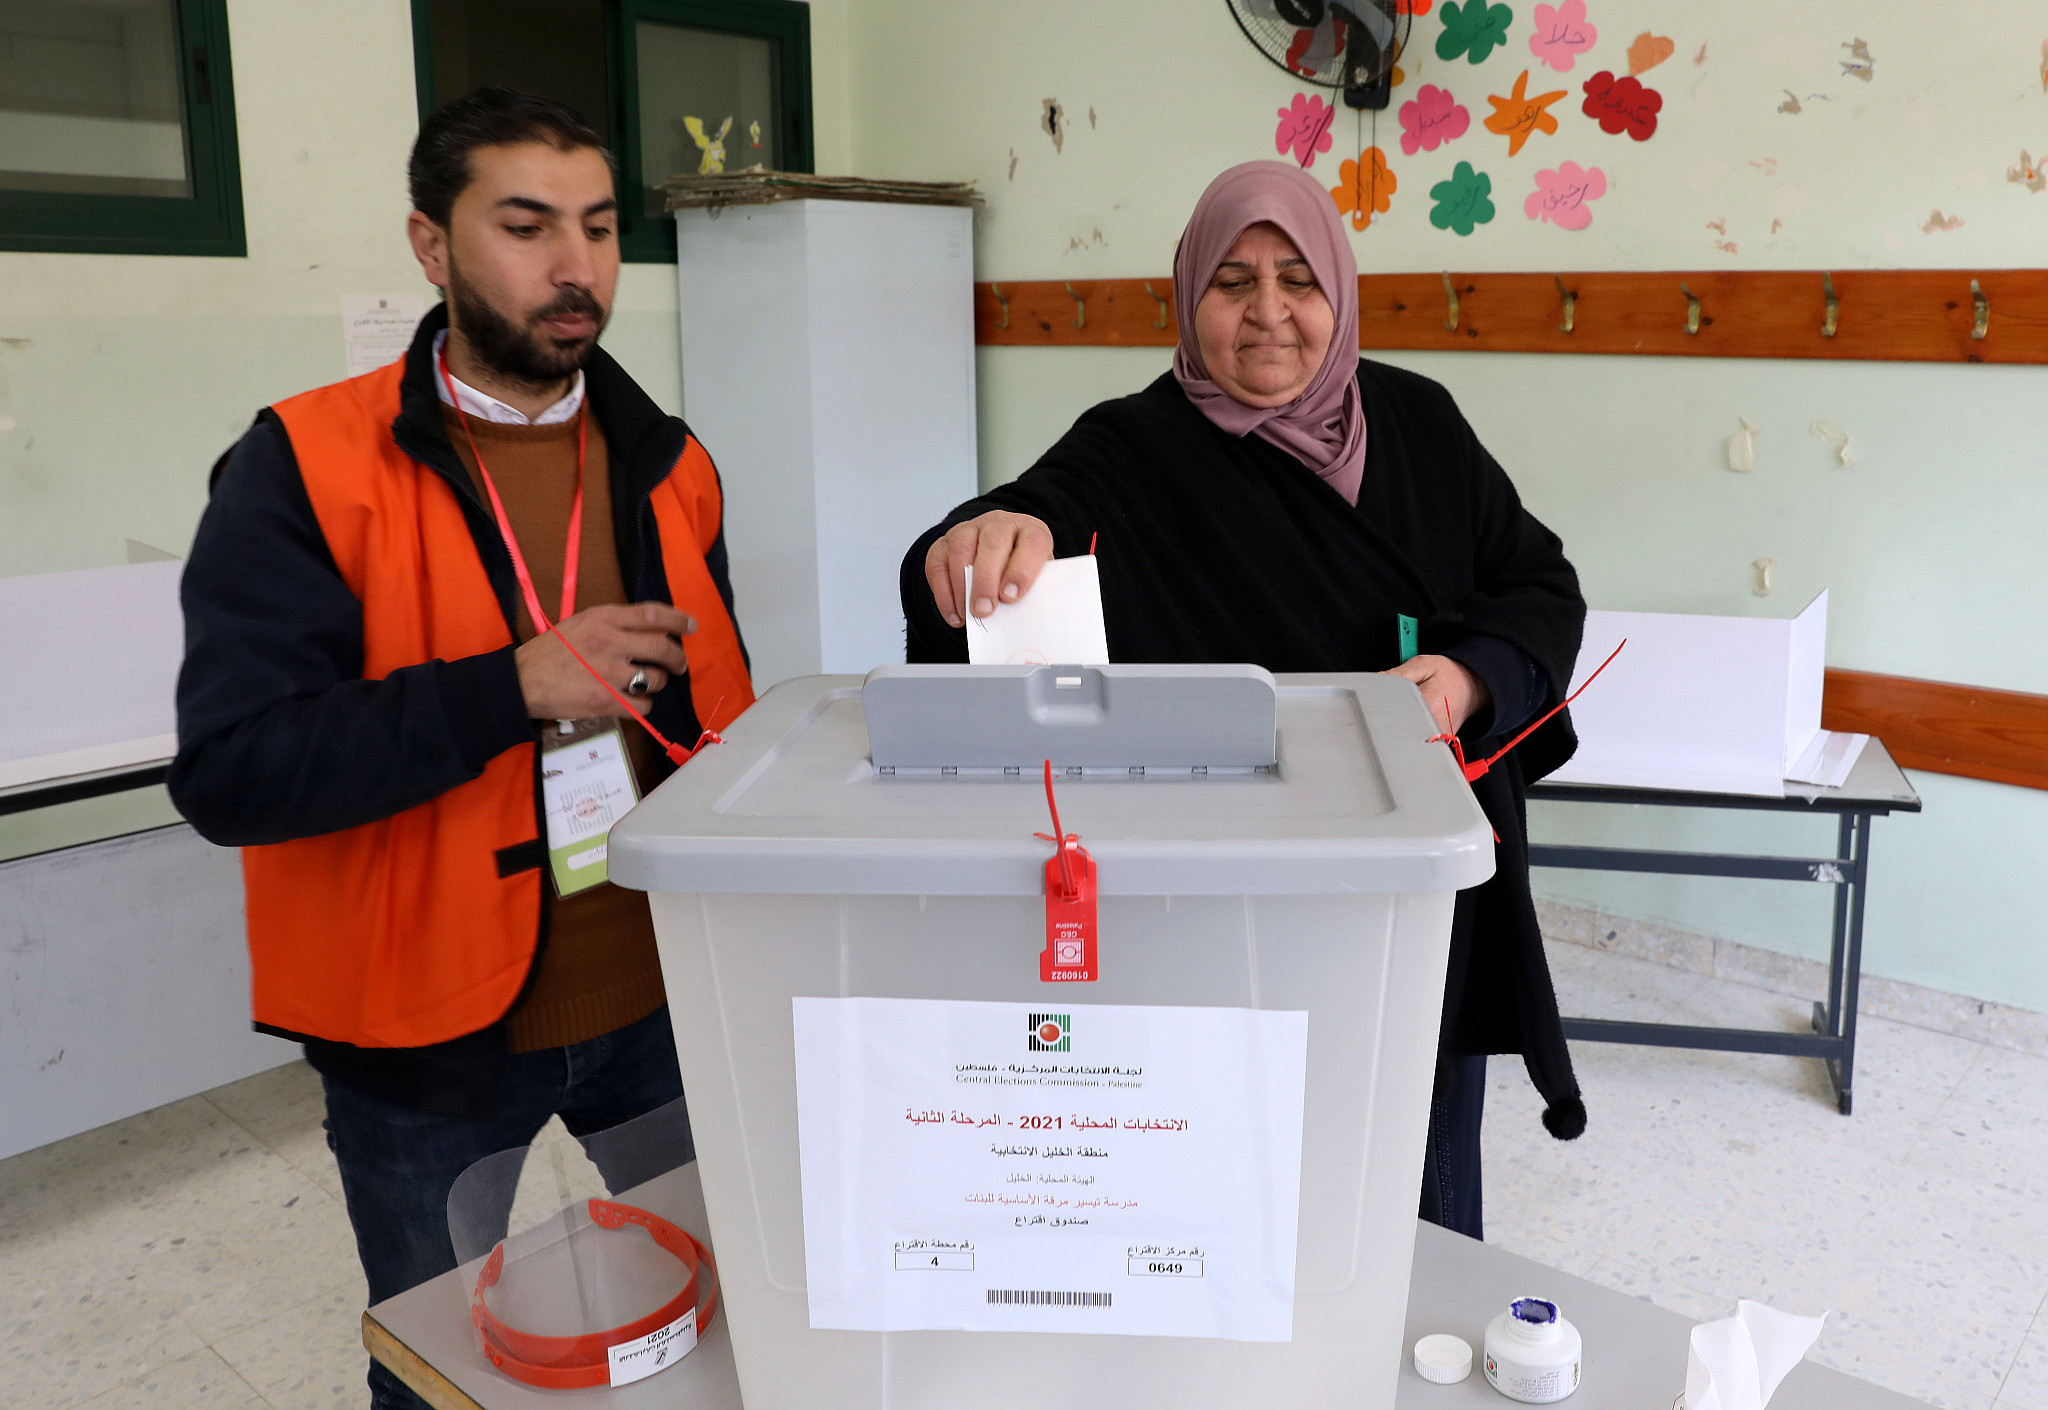 Palestinians vote during the Palestinian local elections, in the West Bank city of Hebron, March 26, 2022. (Wisam Hashlamoun/Flash90)